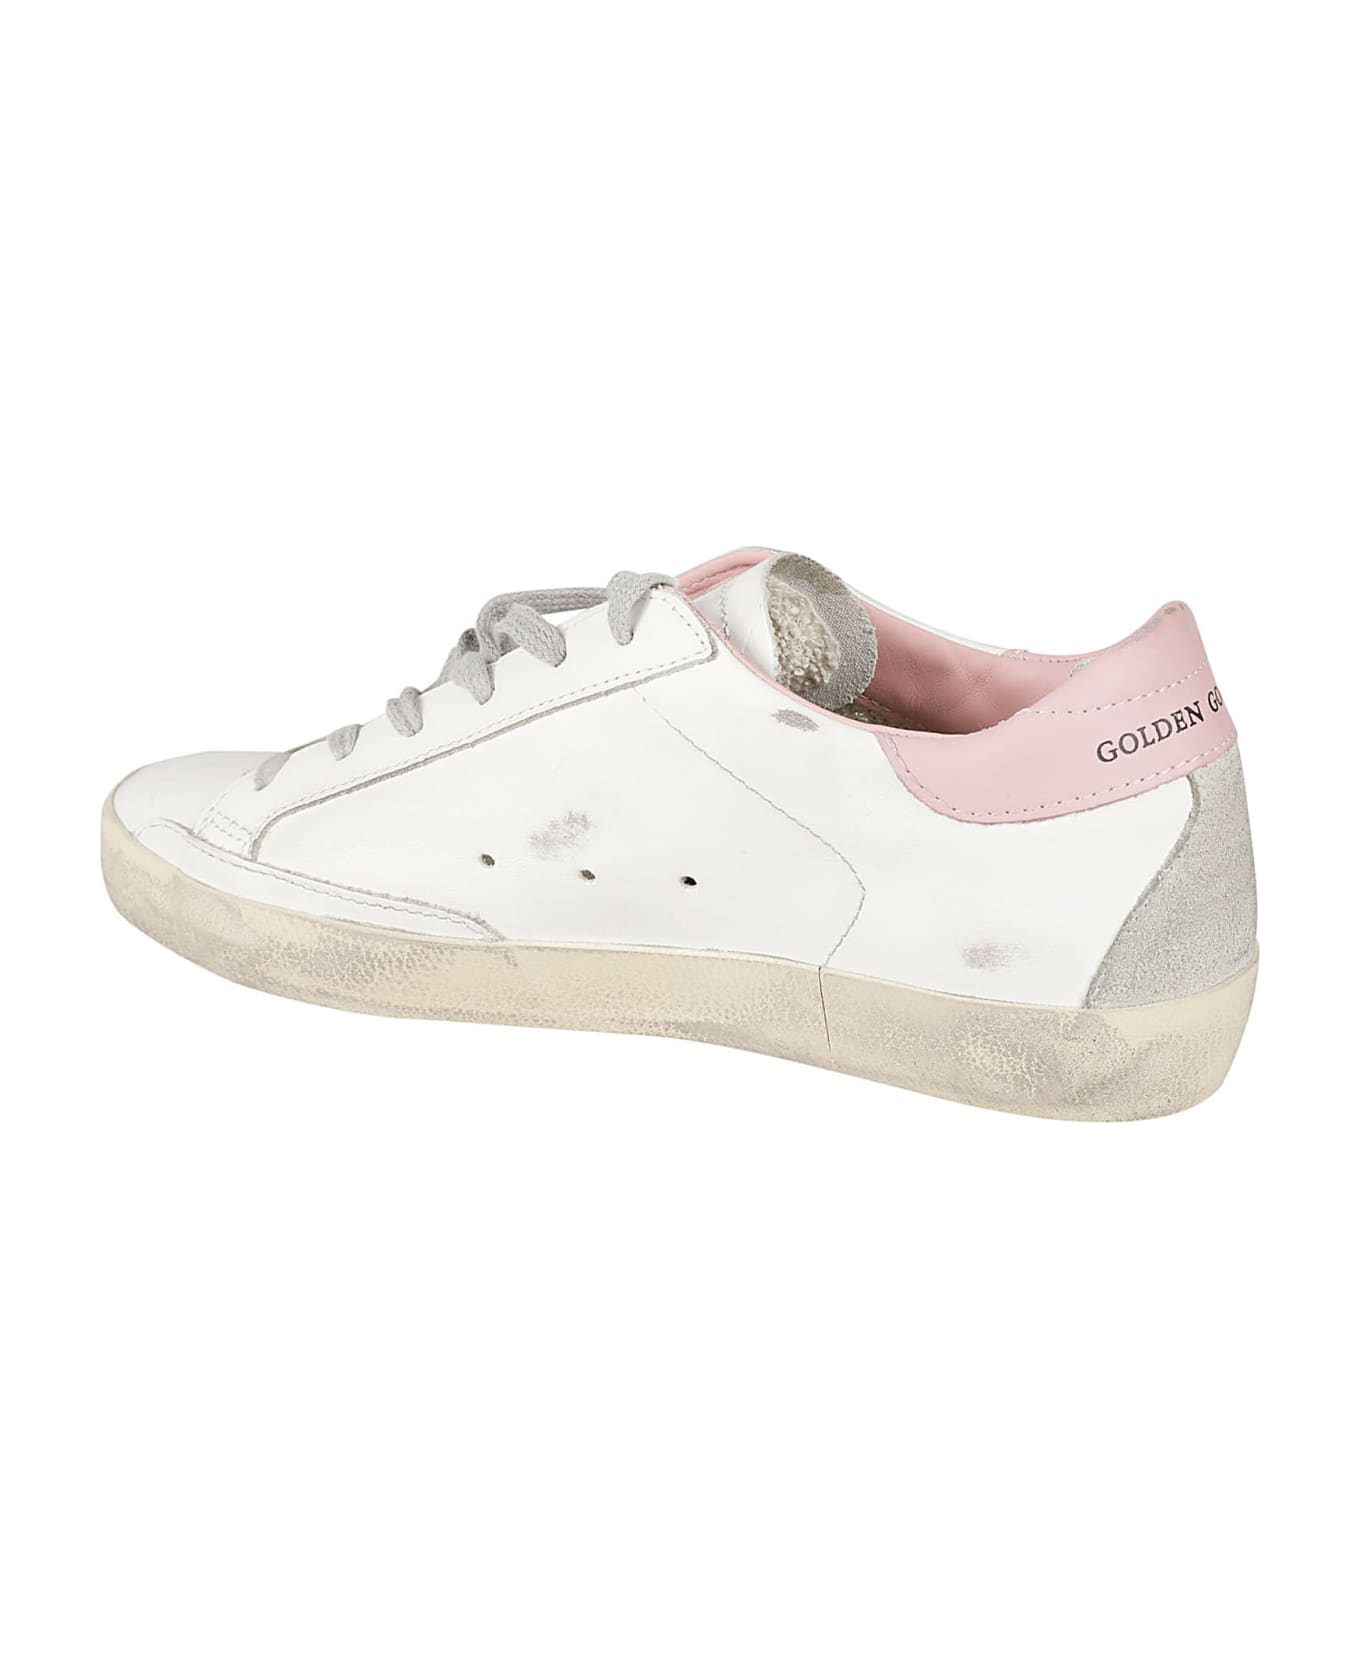 Golden Goose Ball Star Sneakers - White, pink